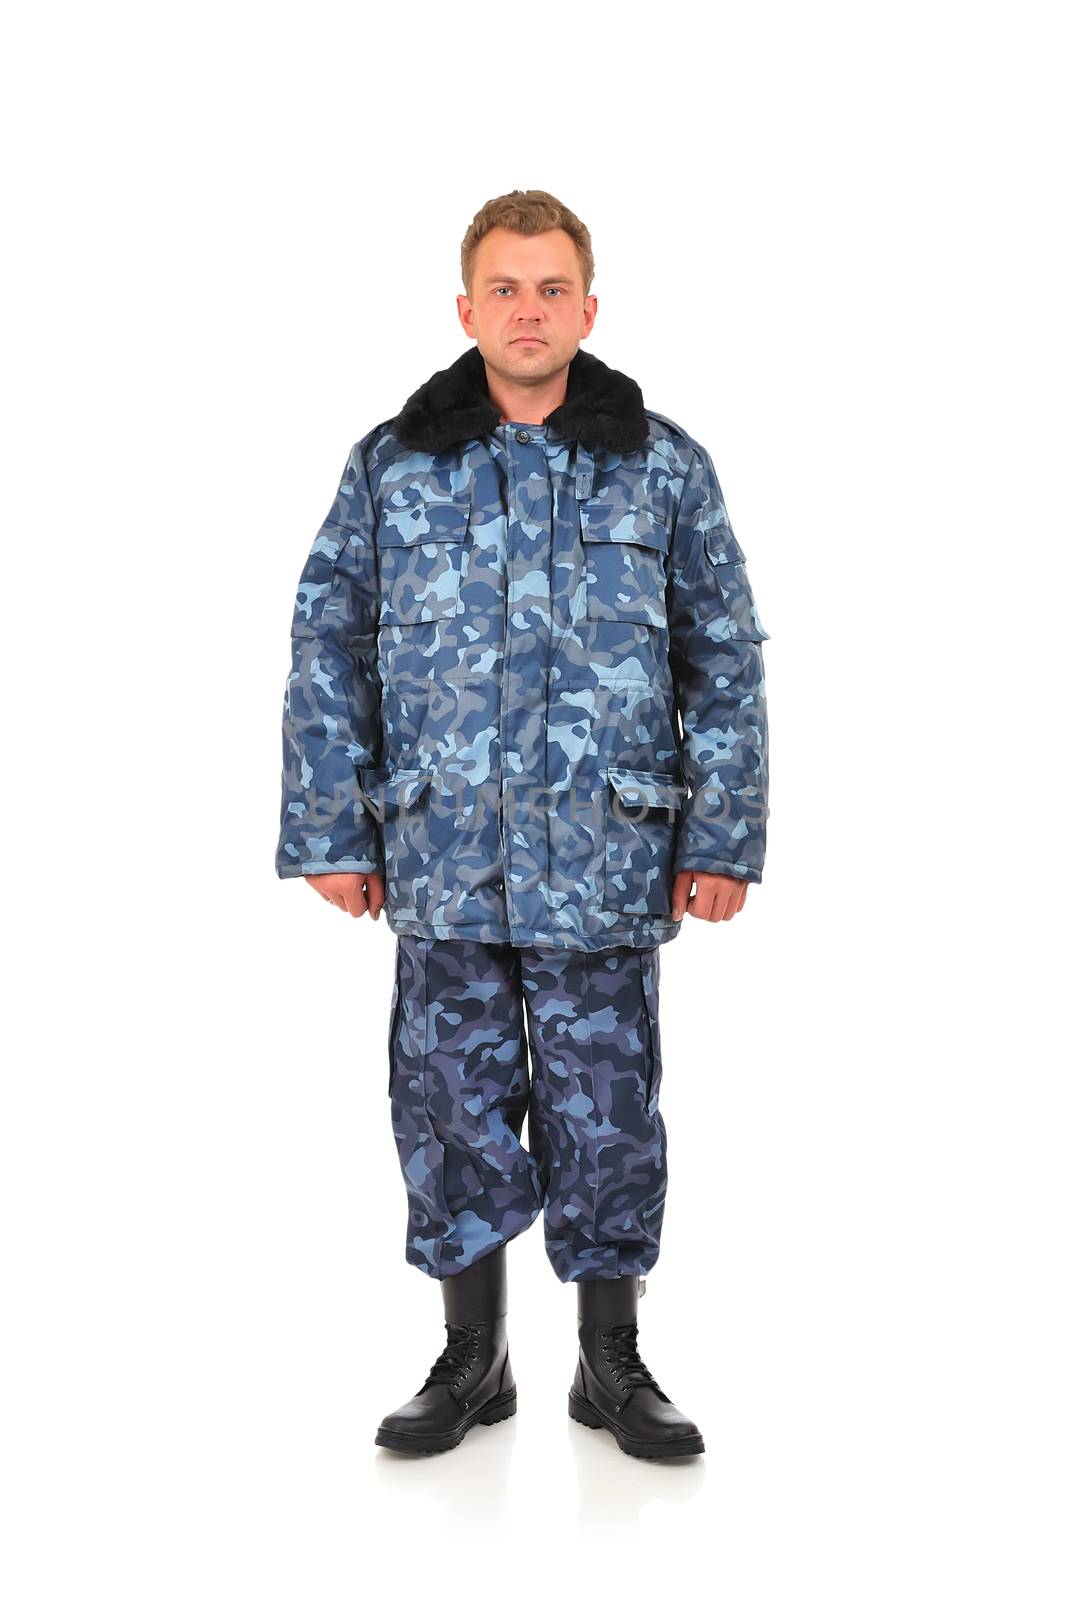 Military Man on a white background